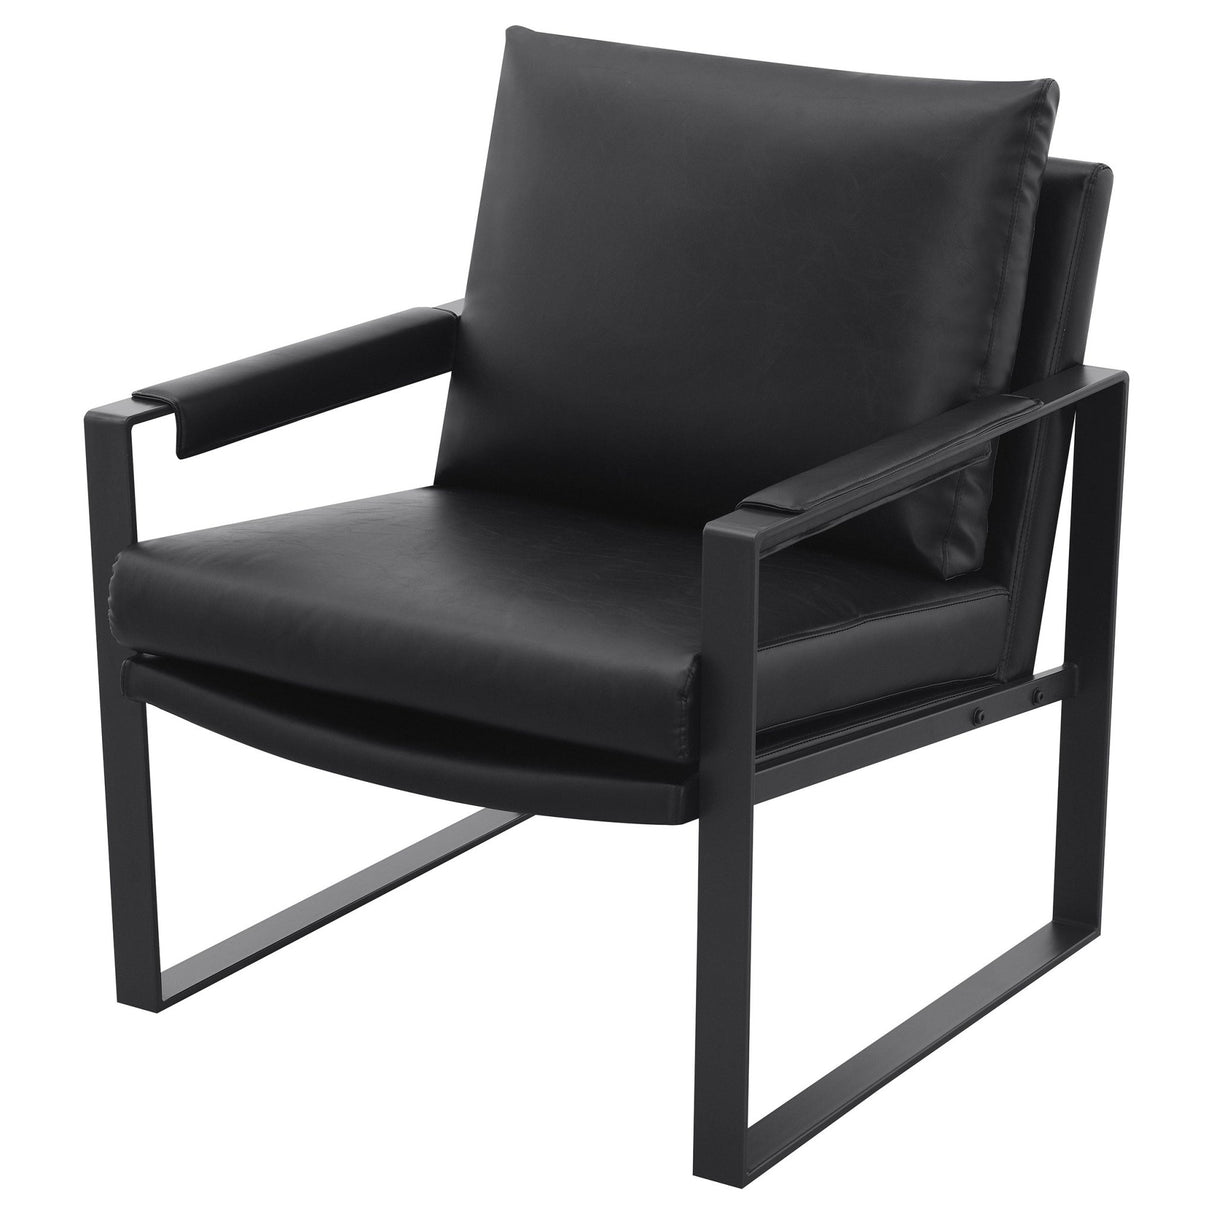 Accent Chair - Rosalind Upholstered Track Arms Accent Chair Black and Gummetal - Accent Chairs - 903021 - image - 3